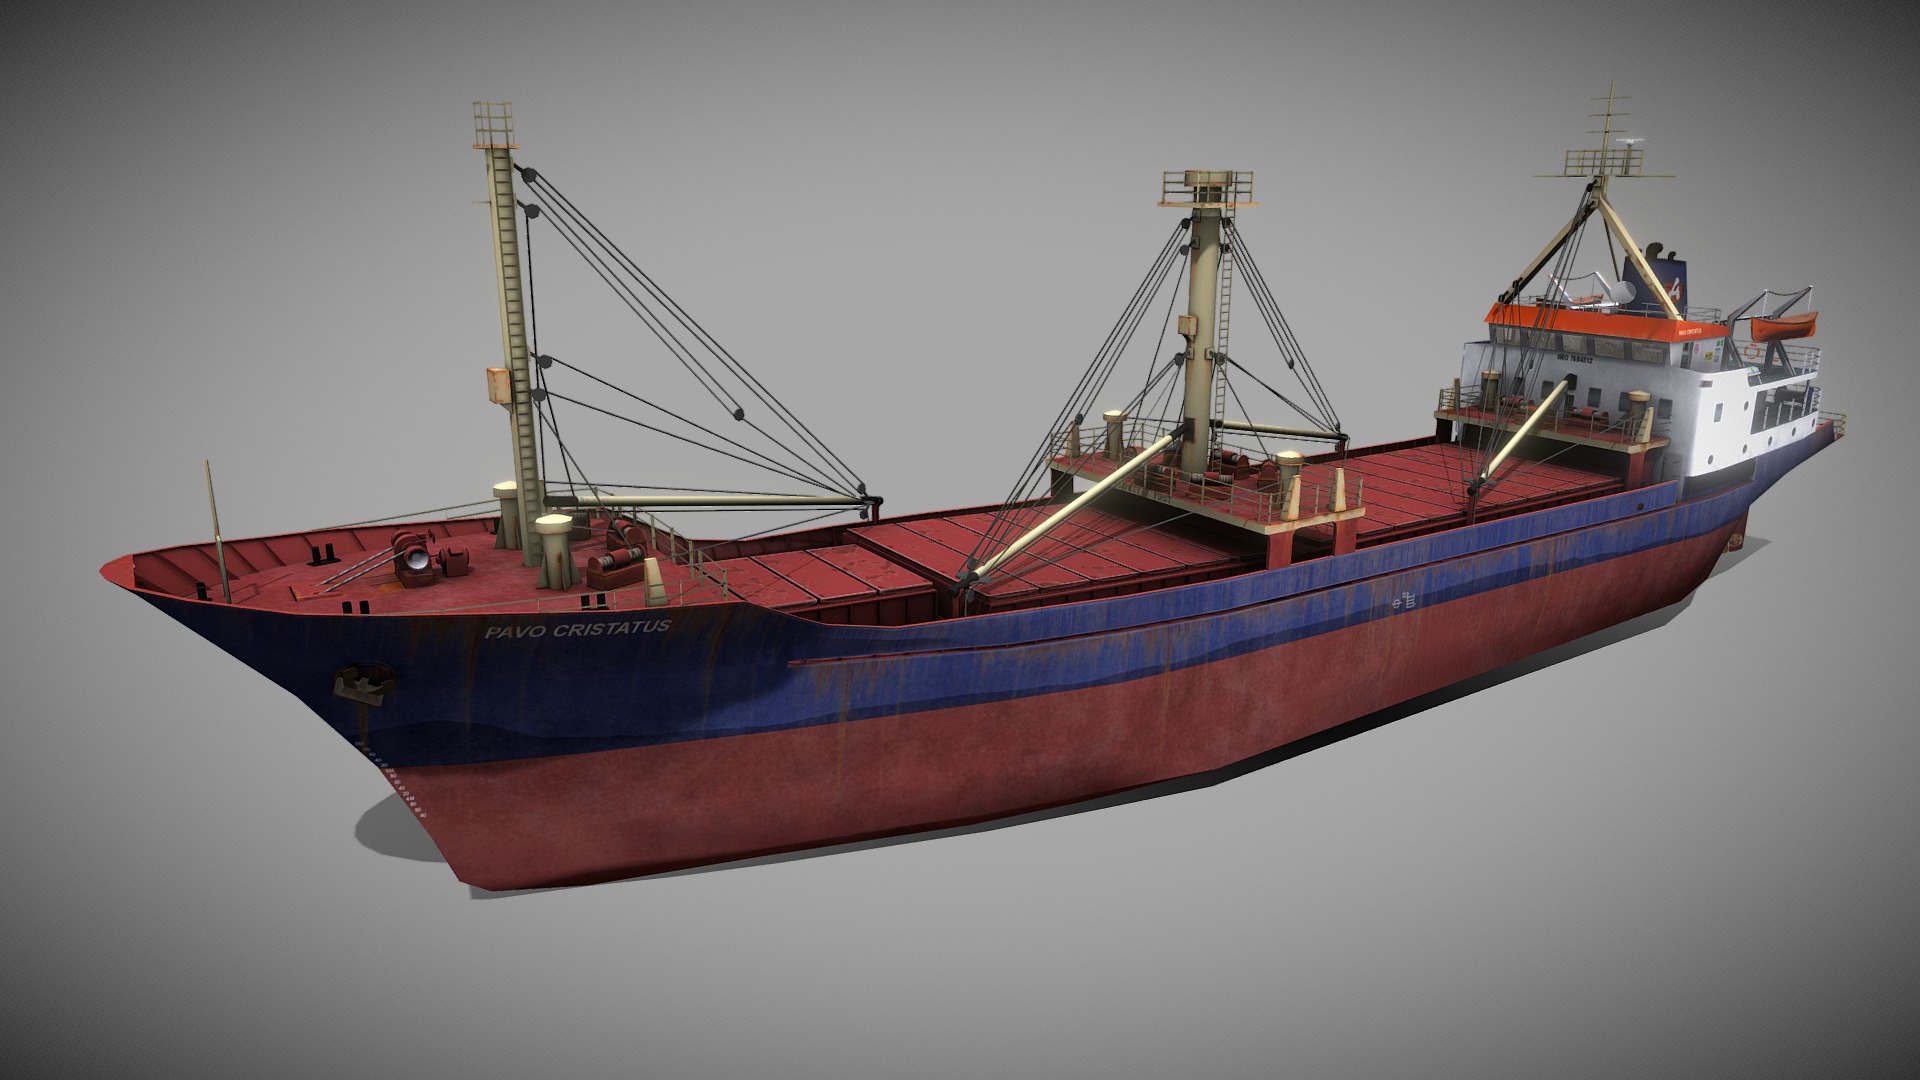 3D model Pavo Christatus (1975) Coaster - This is a 3D model of the Pavo Christatus (1975) Coaster. The 3D model is about a large red and blue ship.